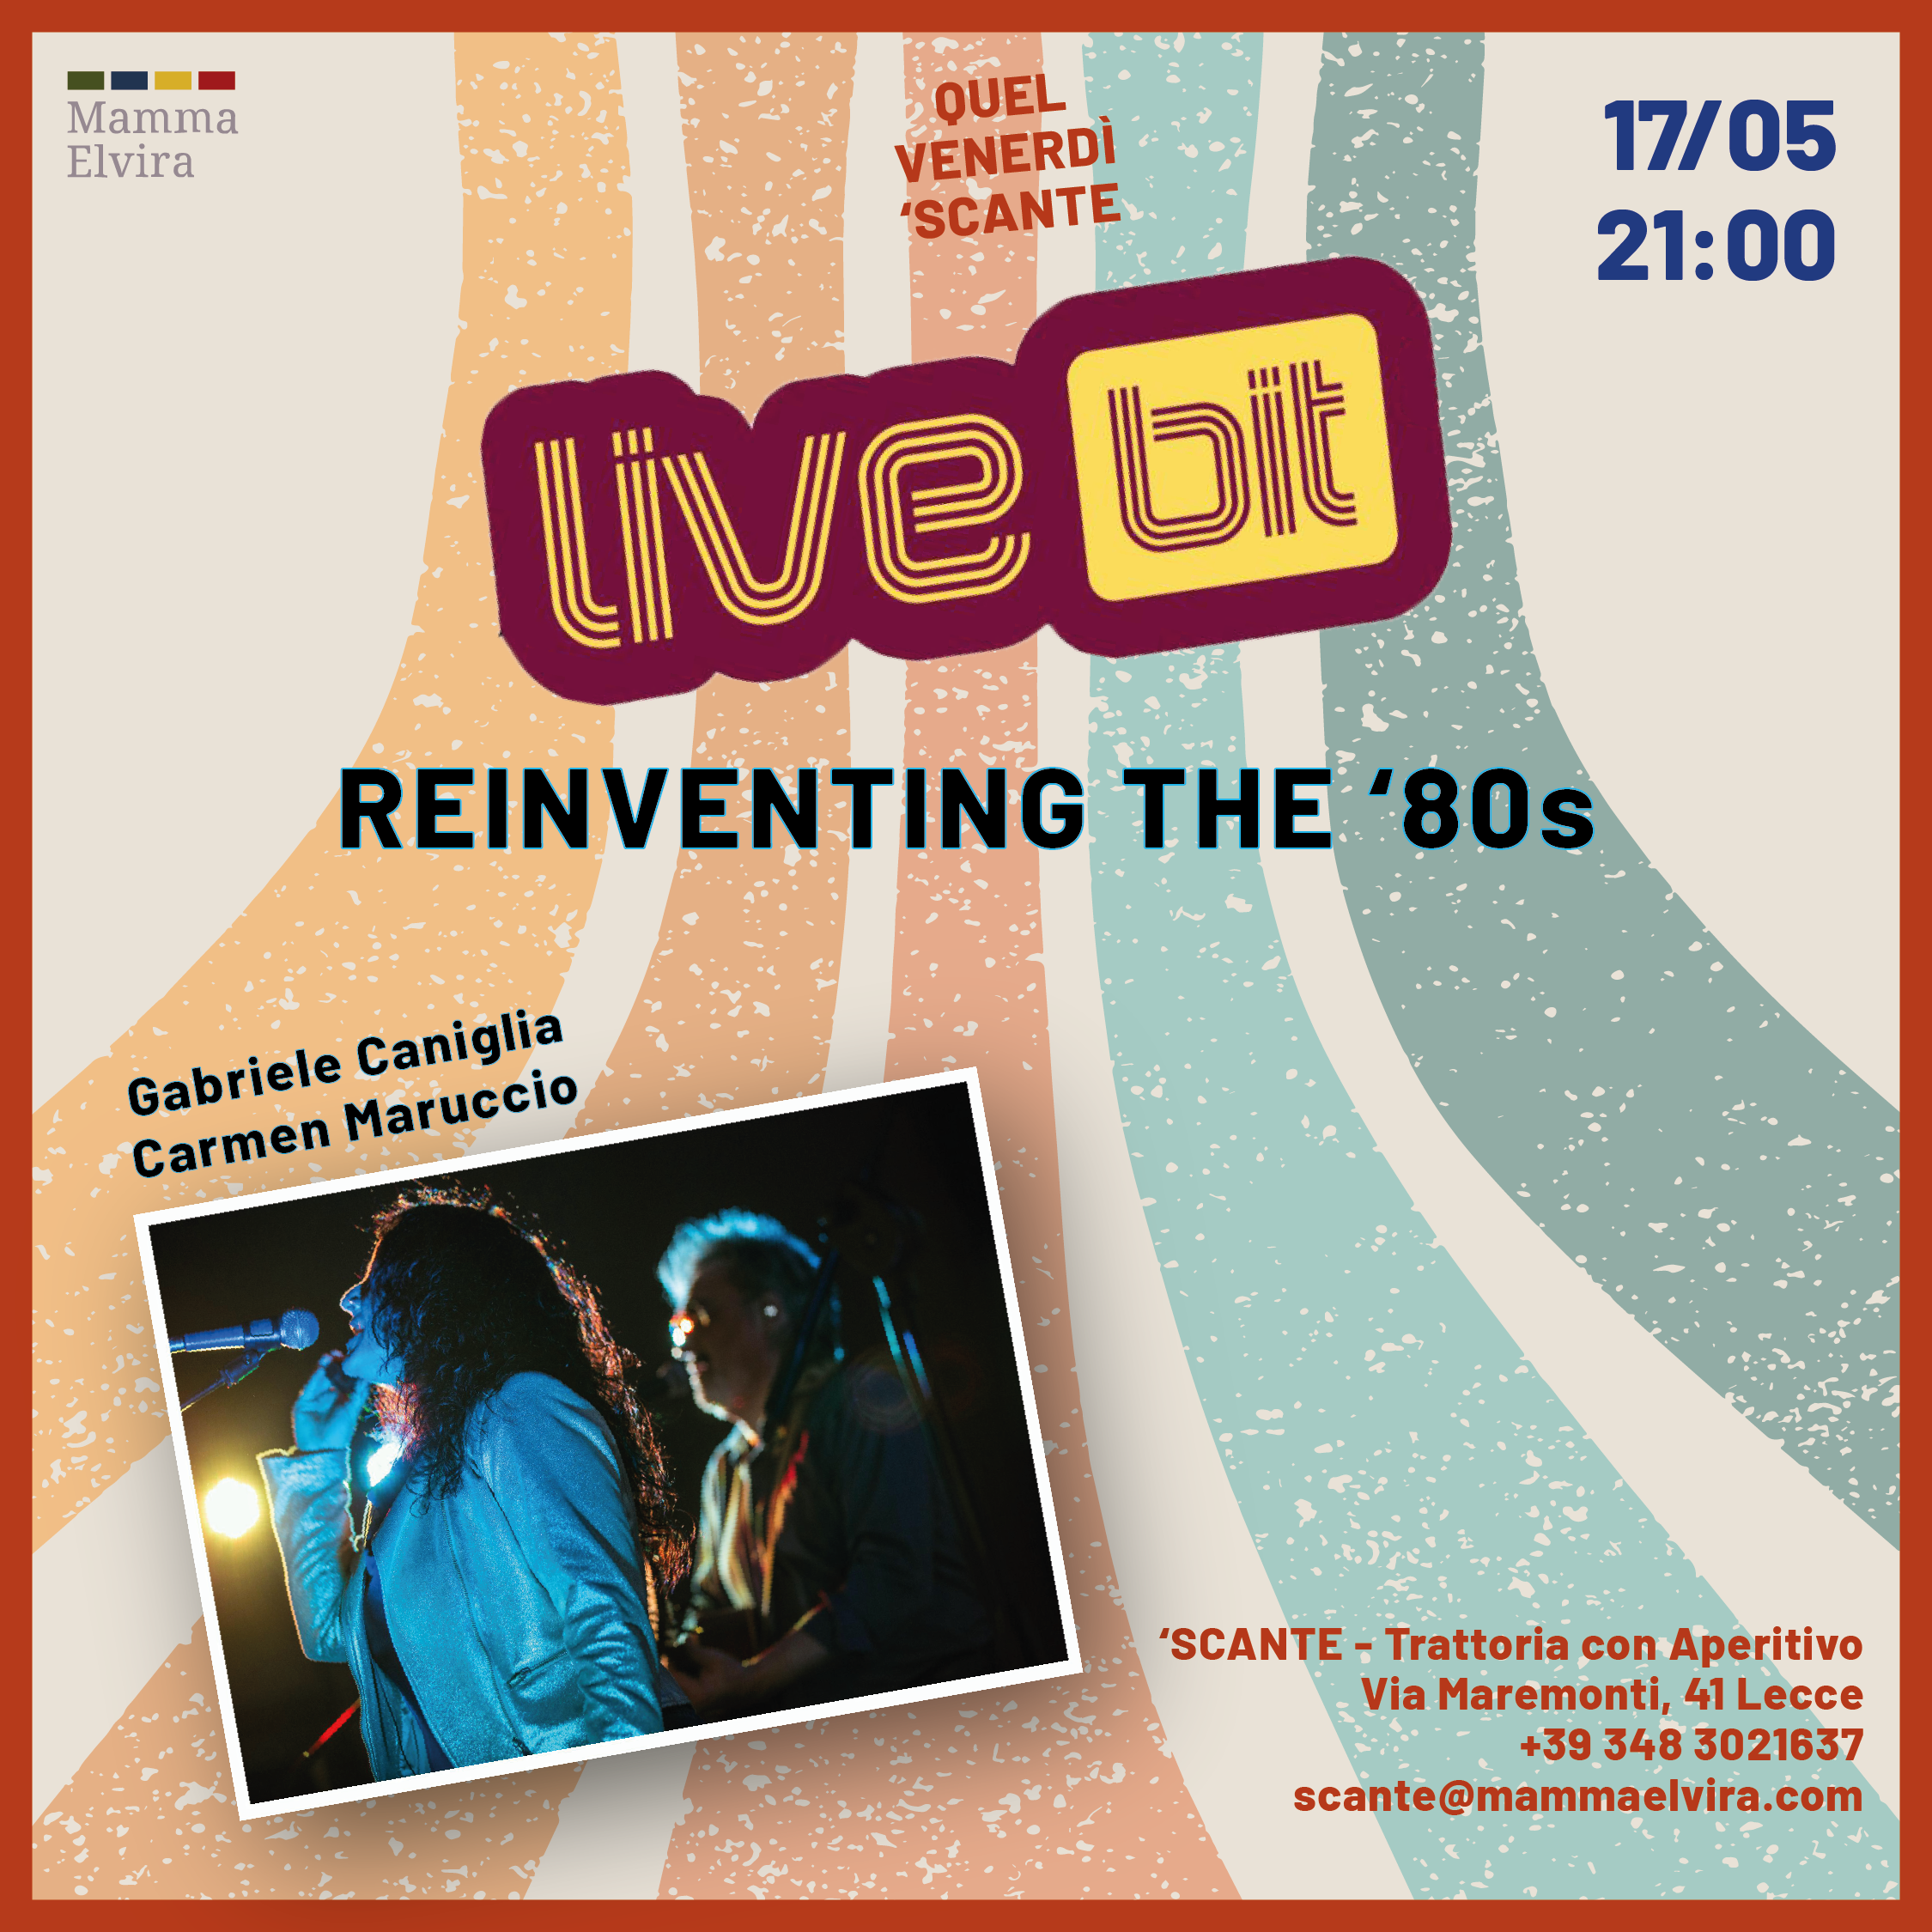 Live Bit, Reinventing the '80s cover image